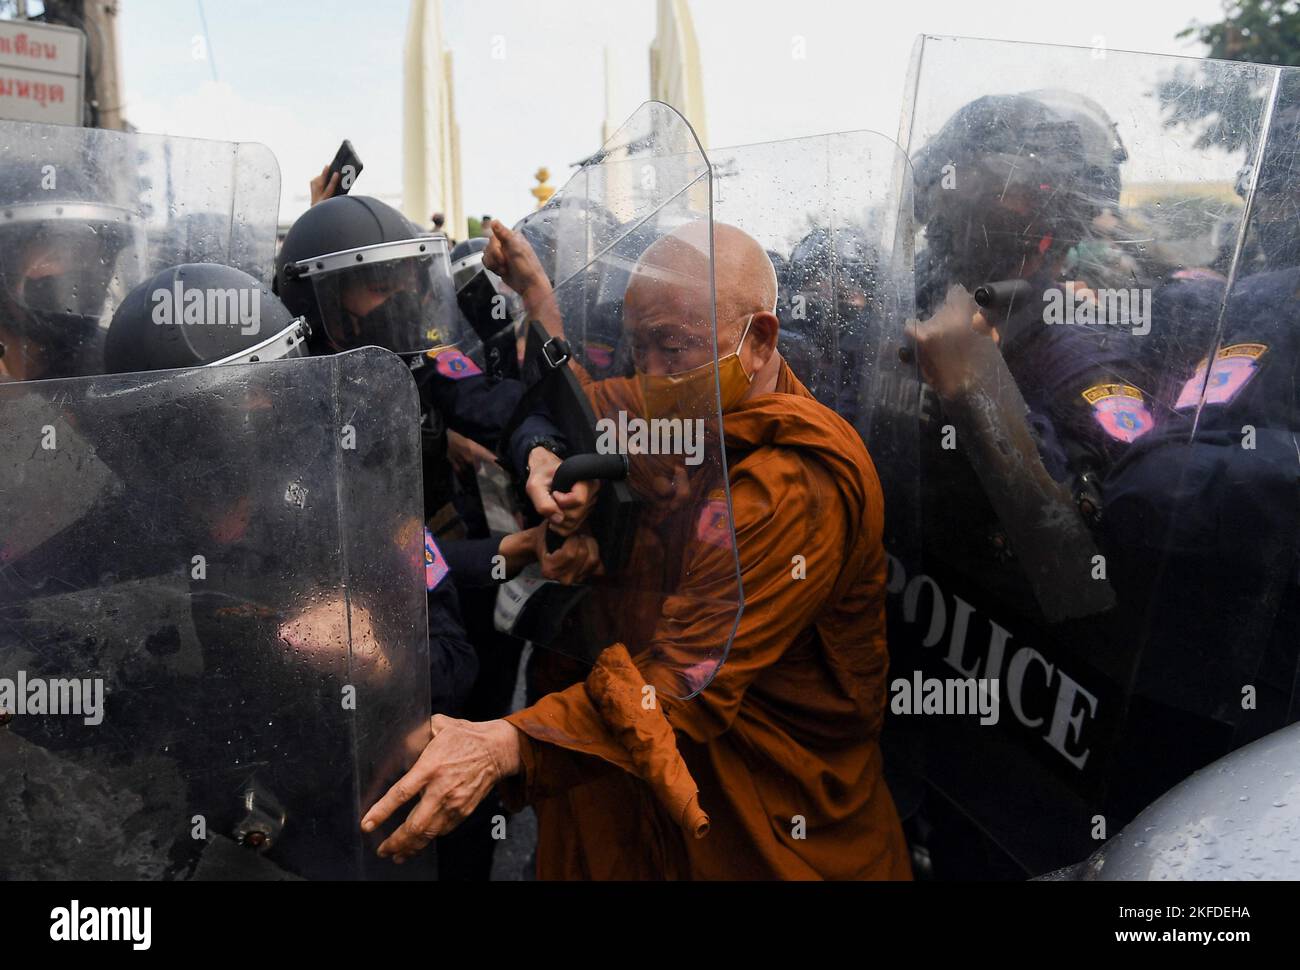 Police officers push their shields on a demonstrator during a protest against the Asia-Pacific Economic Cooperation (APEC) Summit 2022, near the Democracy Monument in Bangkok, Thailand November 18, 2022. REUTERS/Chalinee Thirasupa Stock Photo